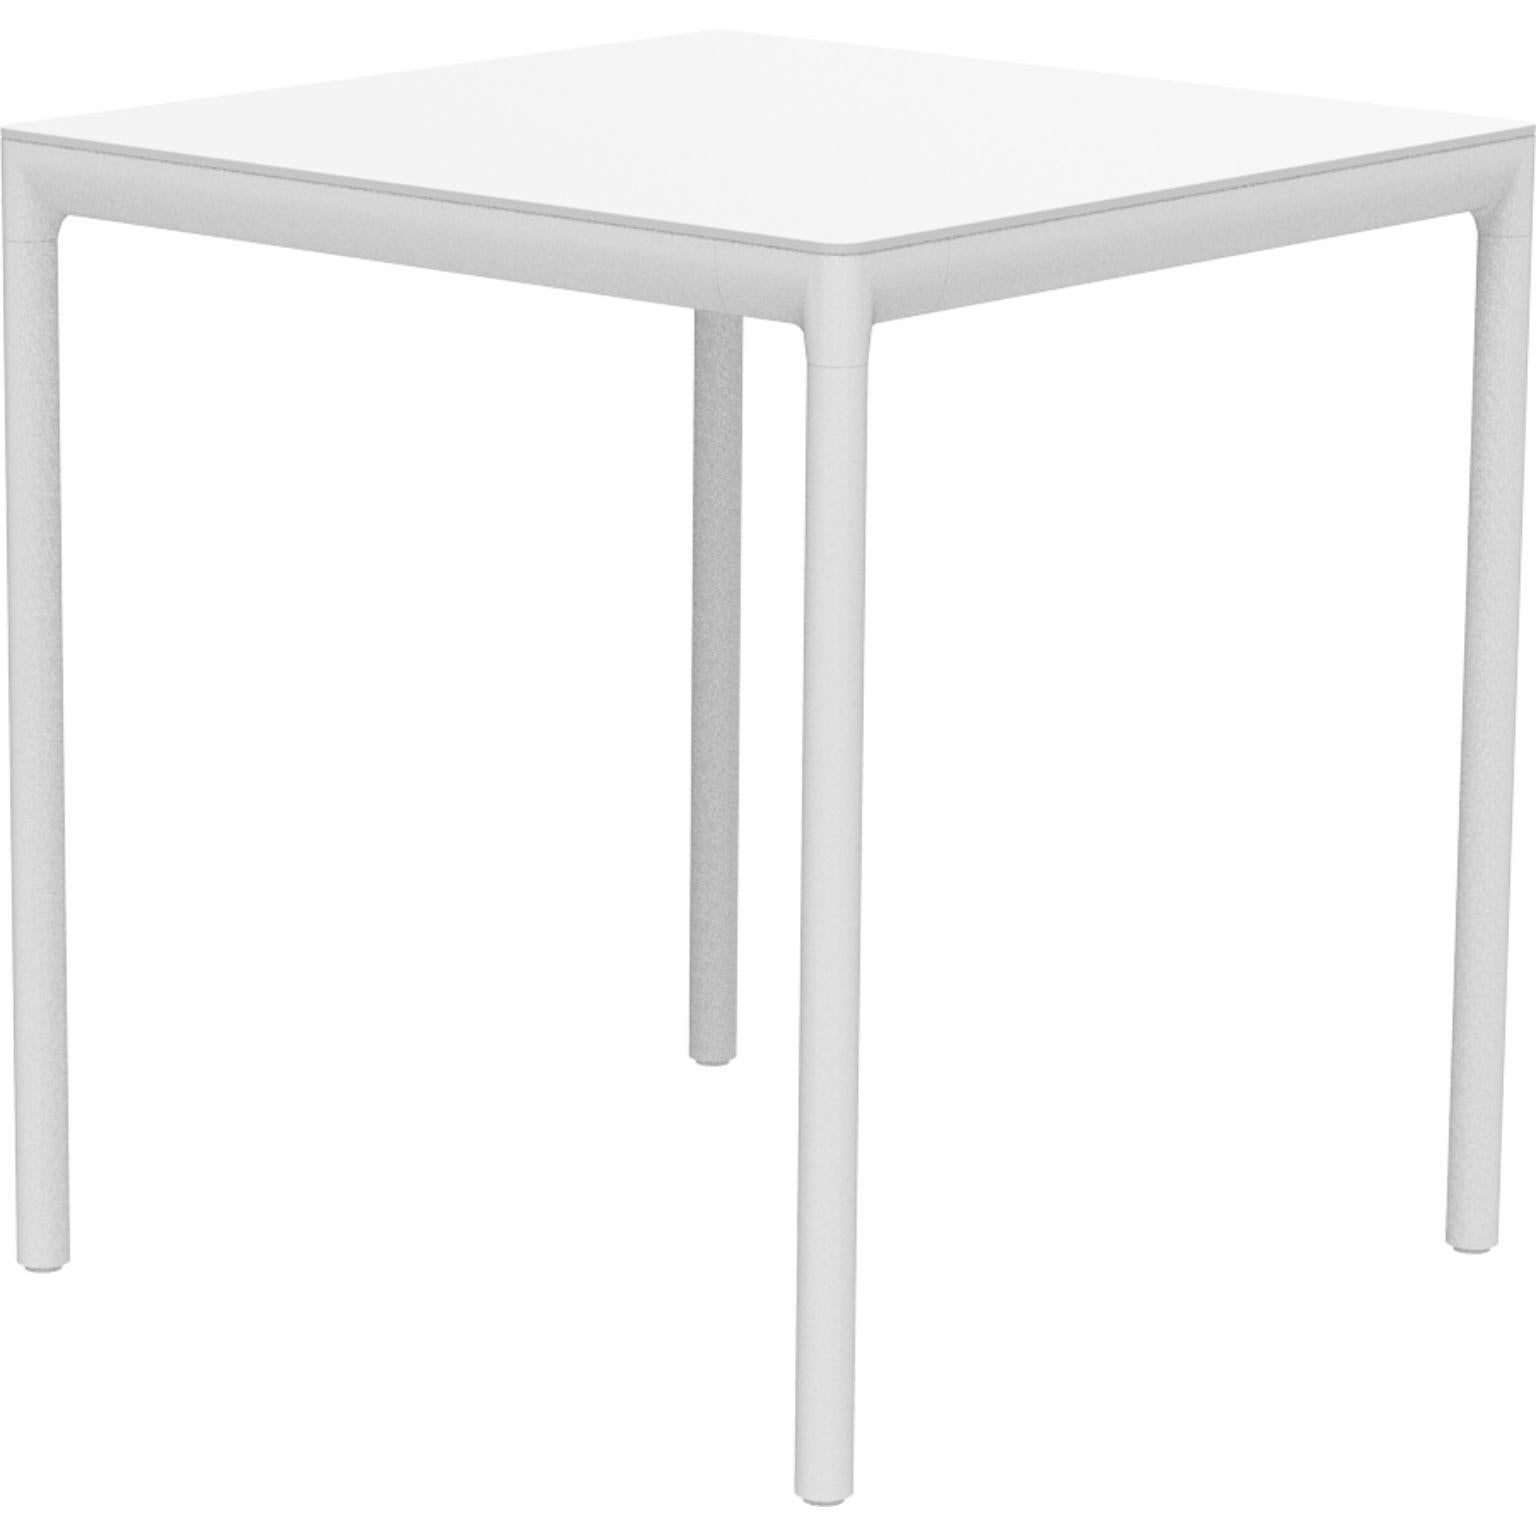 Ribbons White 70 side table by MOWEE
Dimensions: D70 x W70 x H75 cm.
Material: Aluminum, HPL top.
Weight: 12 kg.
Also available in different colors and finishes. (HPL Black Edge or Neolith top). 

An unmistakable collection for its beauty and